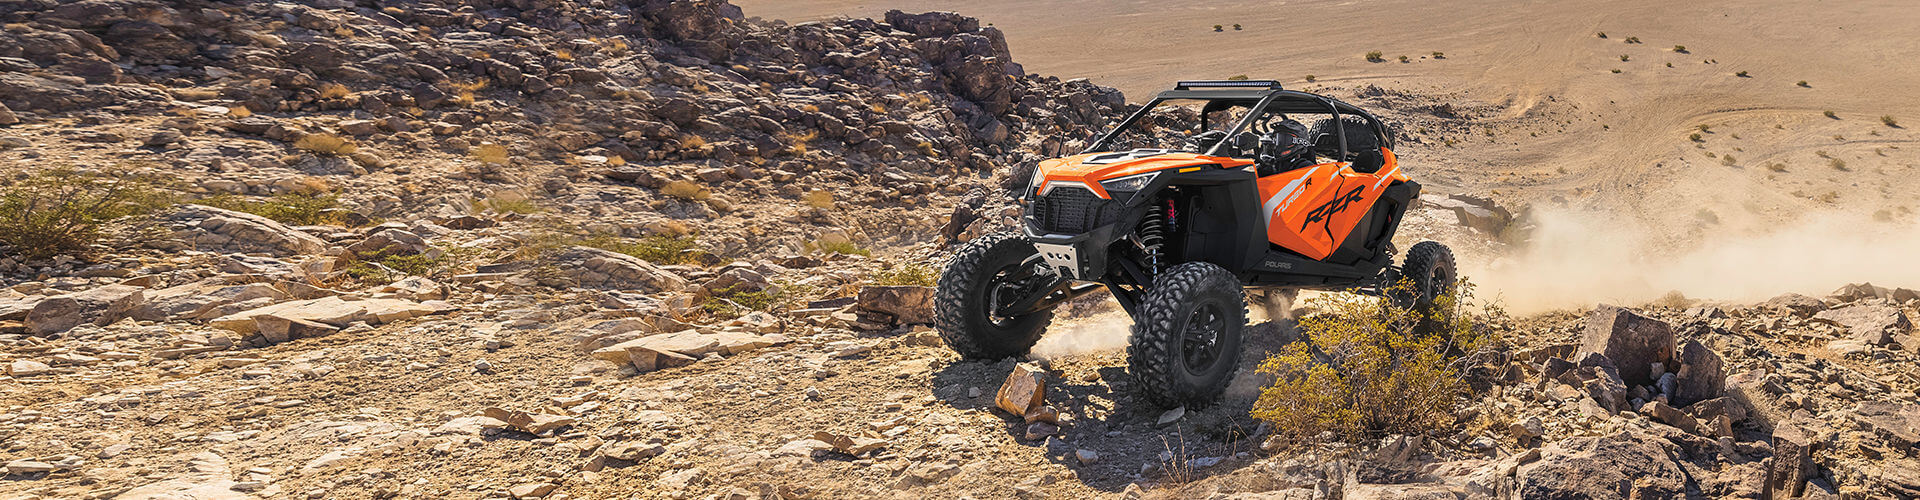 RZR TURBO R 4 ULTIMATE EPS Image